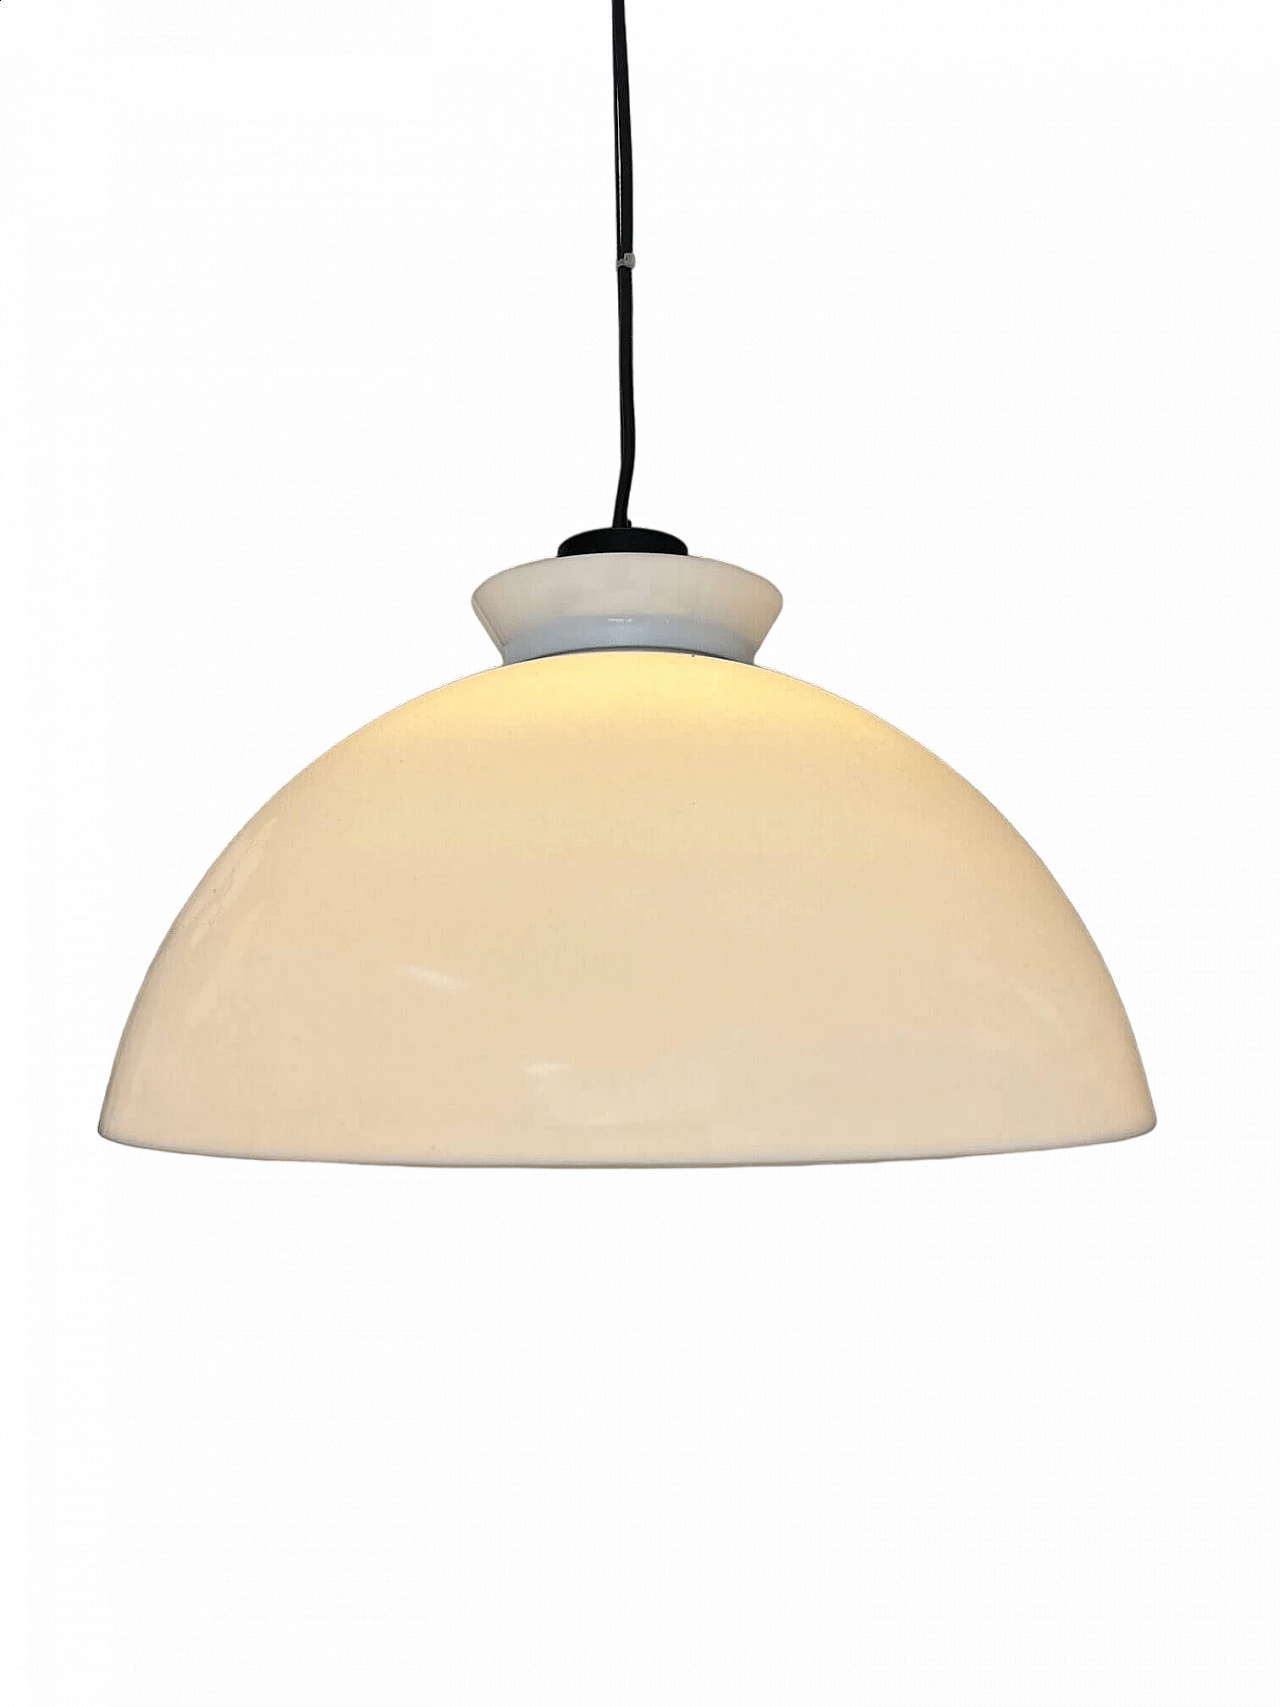 KD6 pendant lamp by Achille and Pier Giacomo Castiglioni for Kartell, 1950s 12